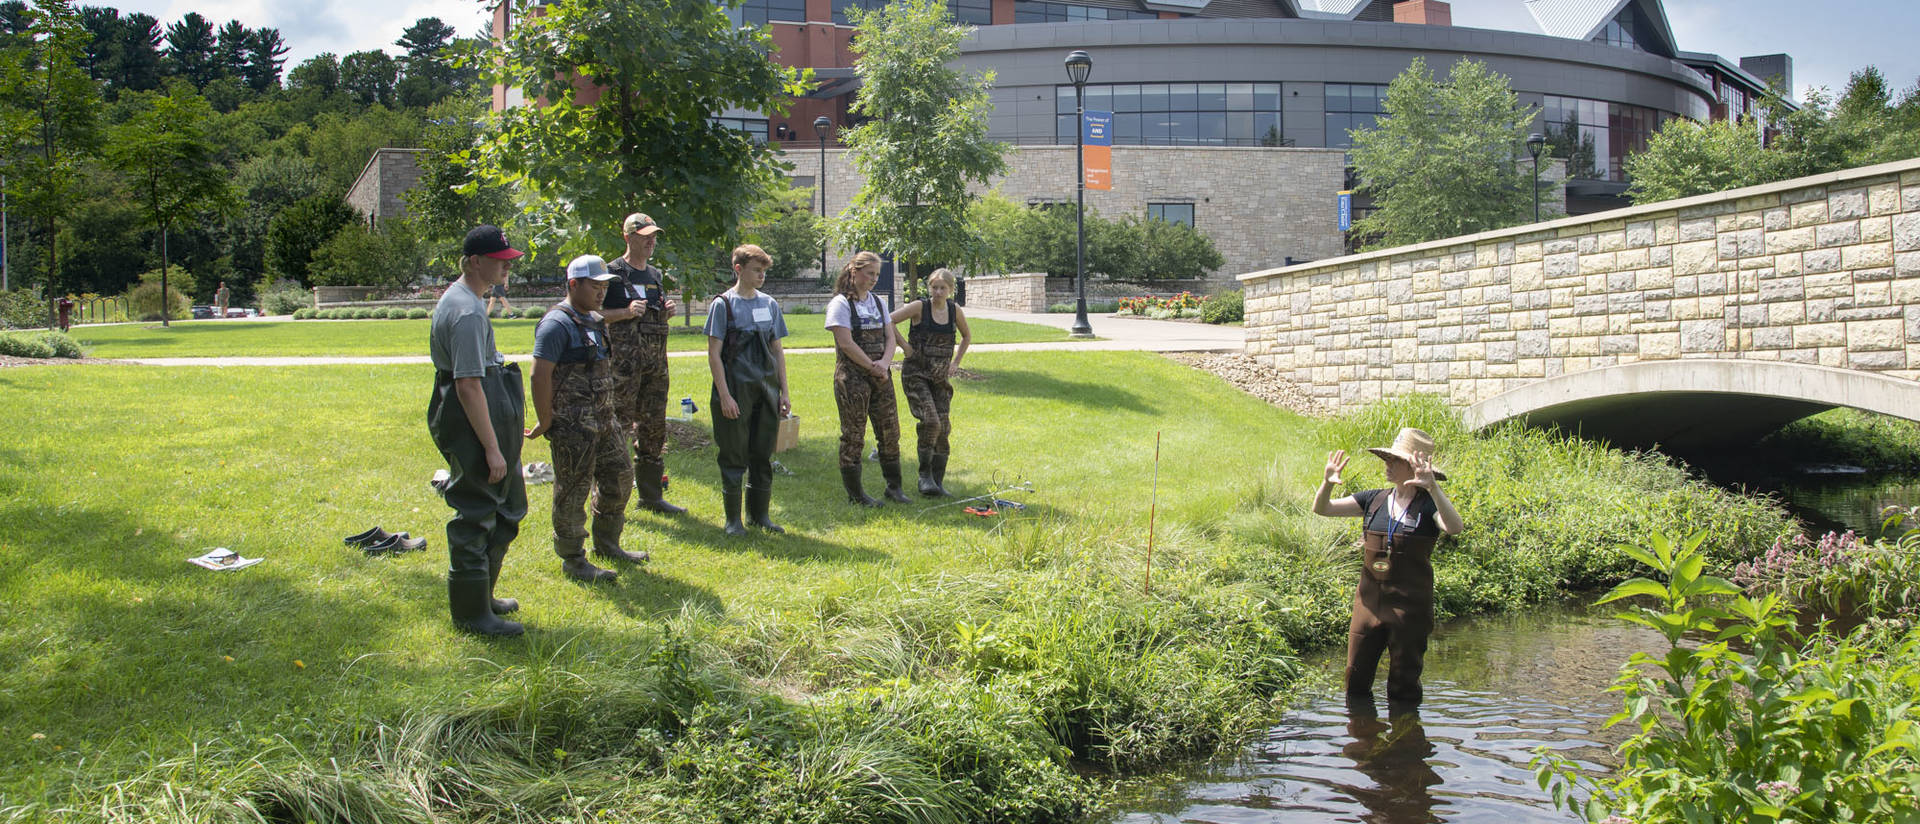 Hydrogeologist Dr. Sarah Vitale, an assistant professor of geology at UW-Eau Claire, explains stream flow measurement in Little Niagara Creek on campus to high school students who were part of a summer class on freshwater science. (Photo by Bill Hoepner)